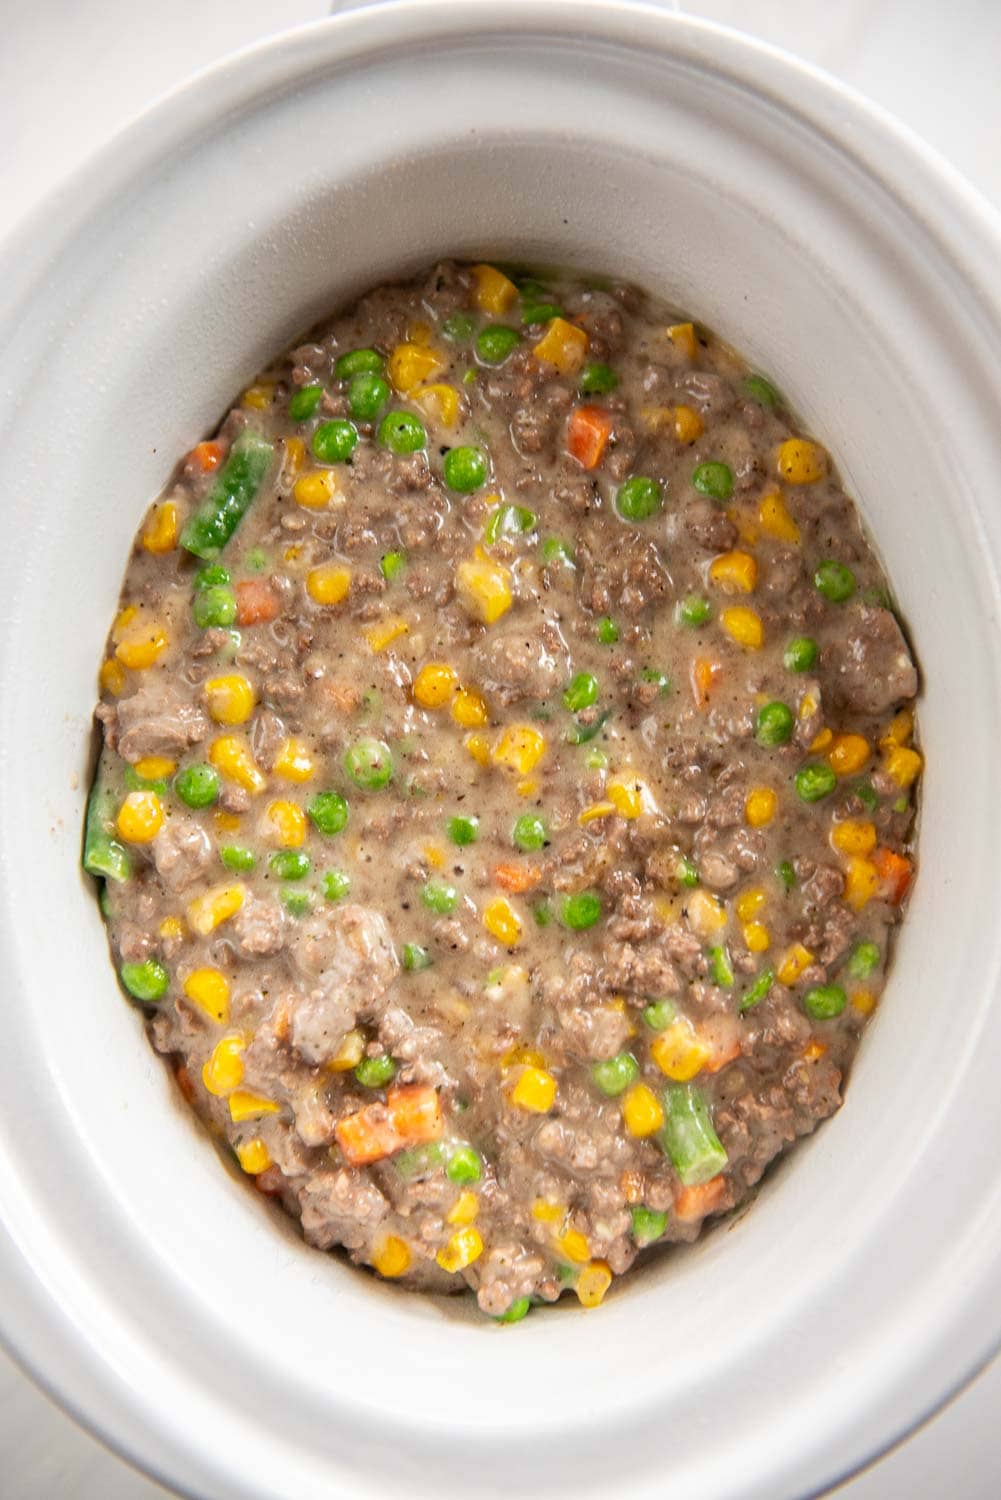 ground beef cooked and thickened with mixed vegetables like peas, green beans, and carrots in slow cooker